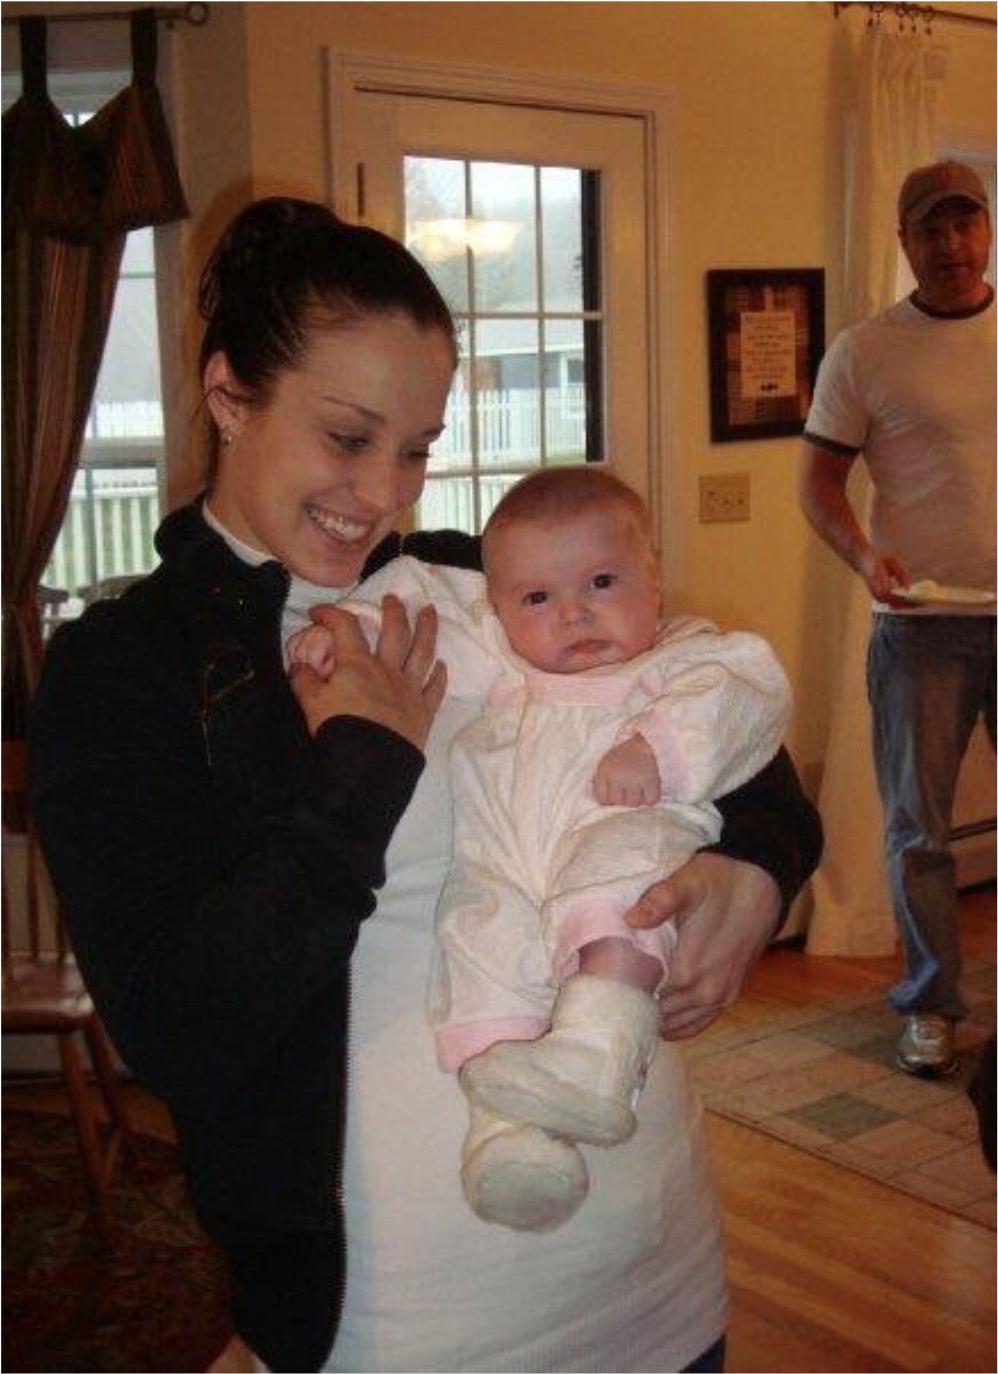 Kasia with baby Caedence at a family event in 2009.